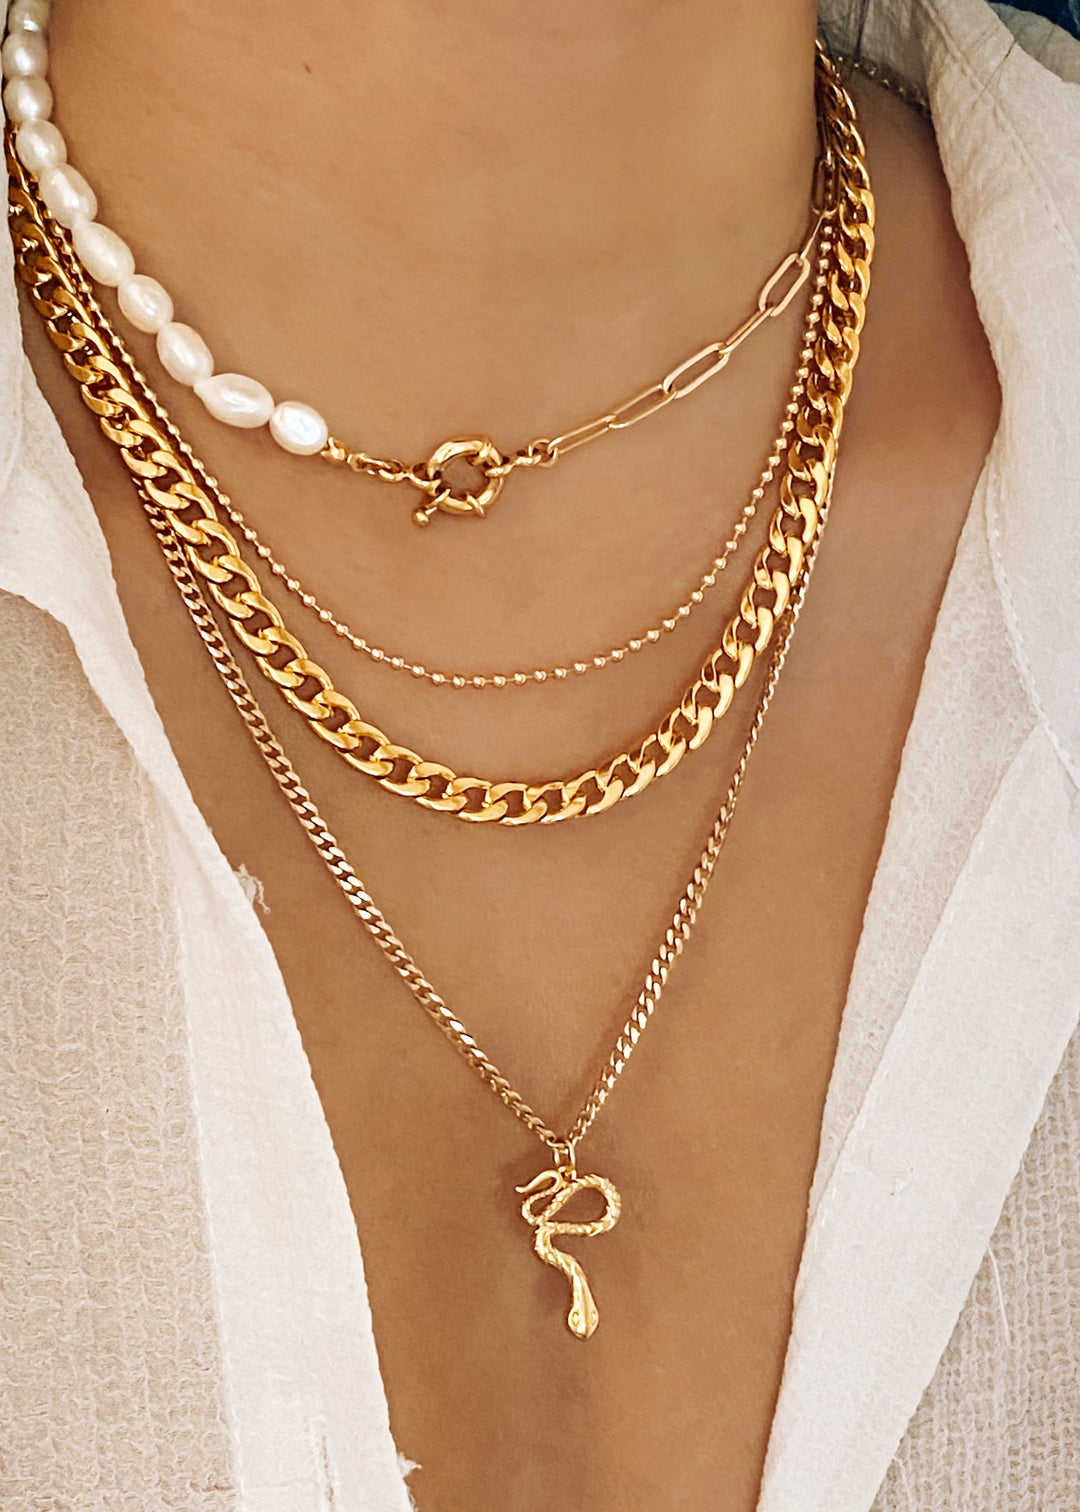 Pearl & Chain Necklace - Gold Filled